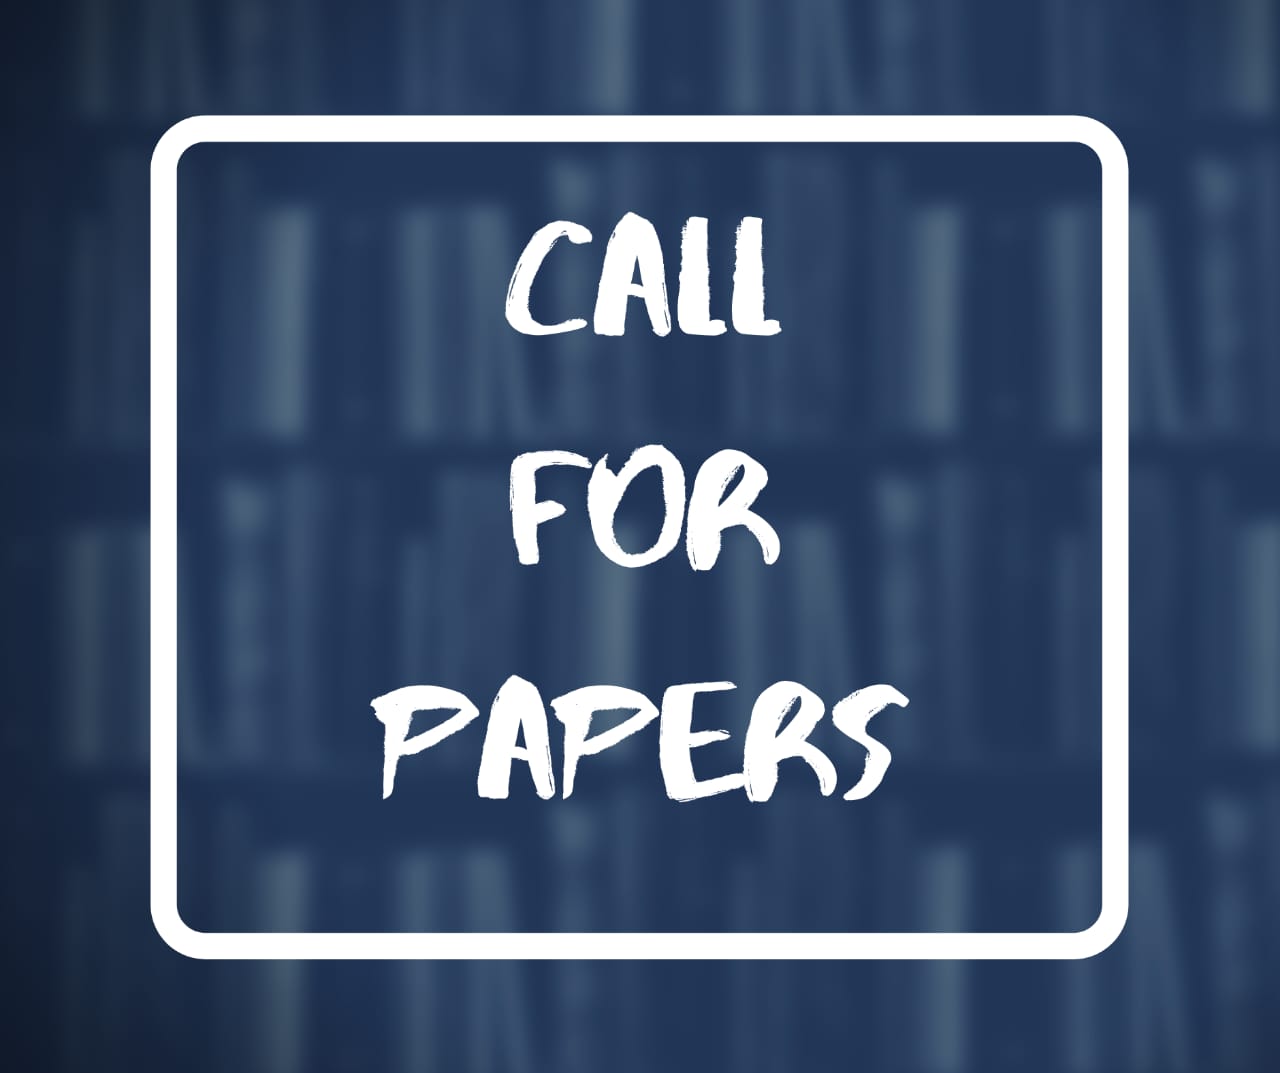 CfP: Intellectual Property and Innovation Review-Journal by HPNLU: Submit by Oct 30